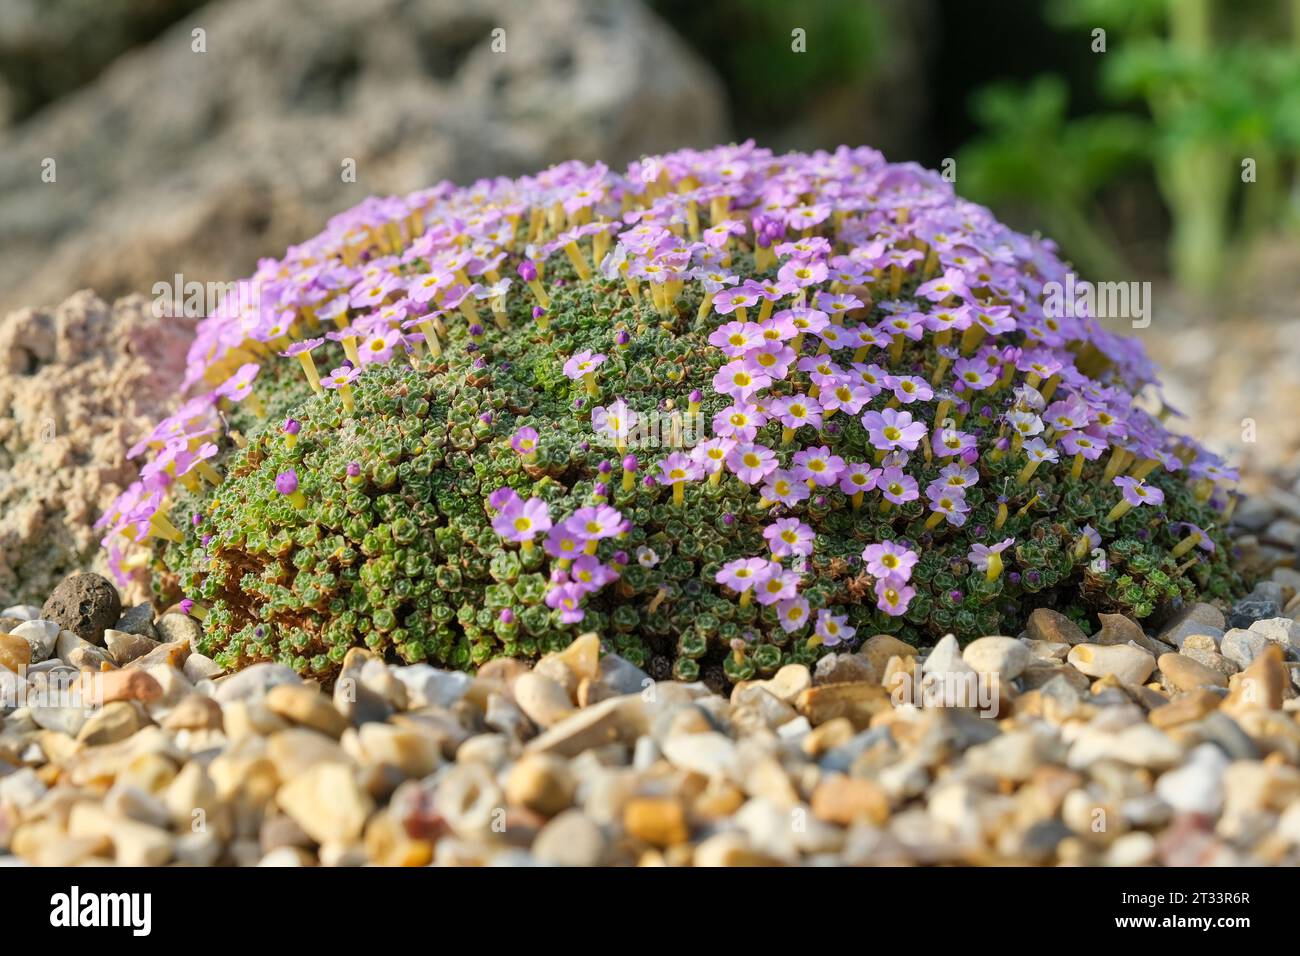 Dionysia curviflora, grey-green cushion plant with solitary flowers - corolla pink to lilac with a white eye, Stock Photo